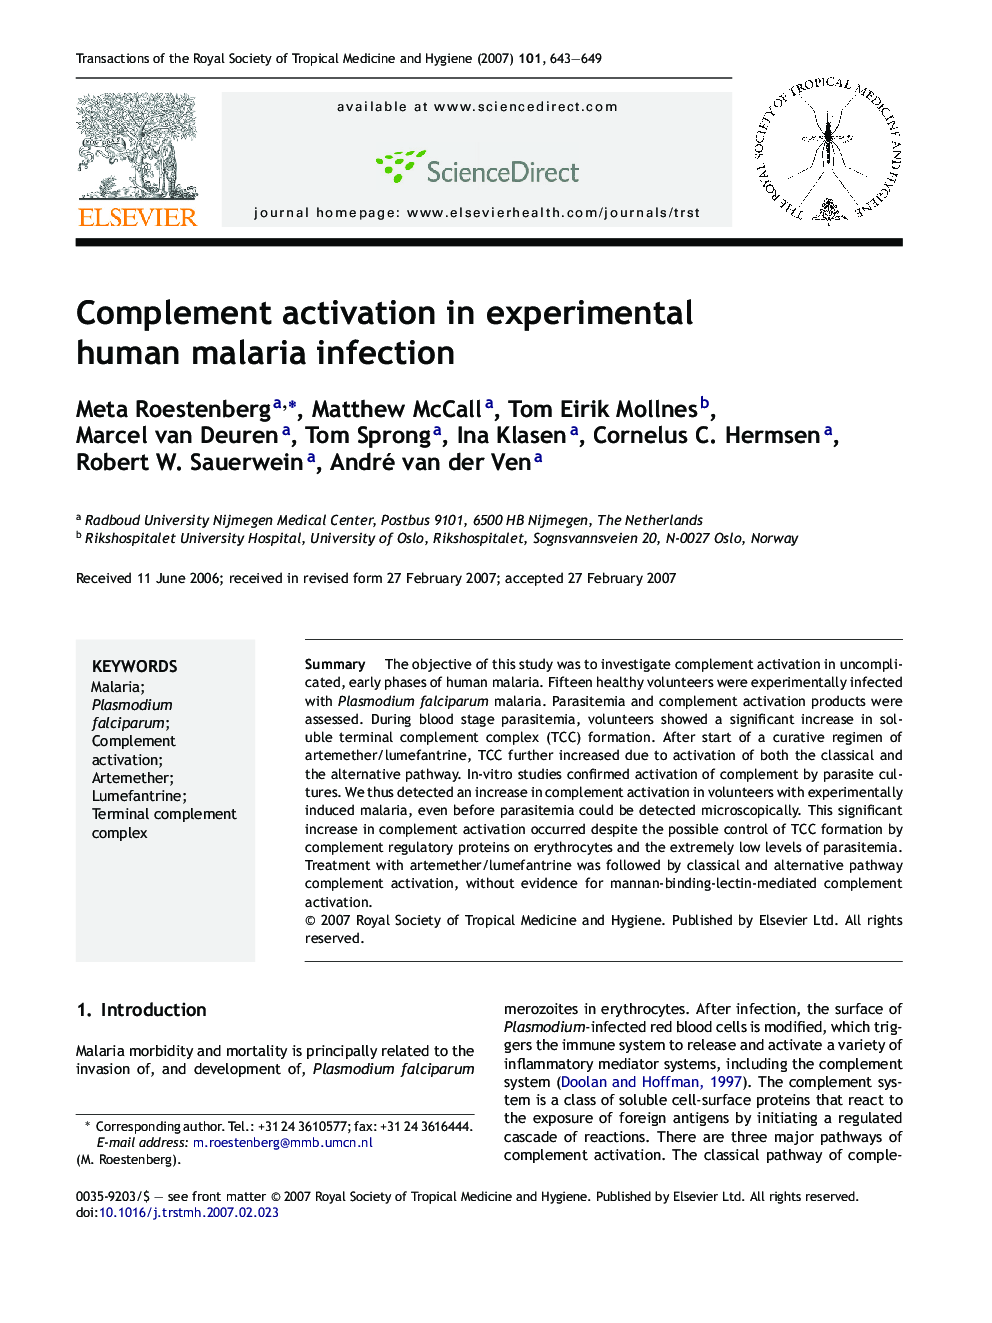 Complement activation in experimental human malaria infection